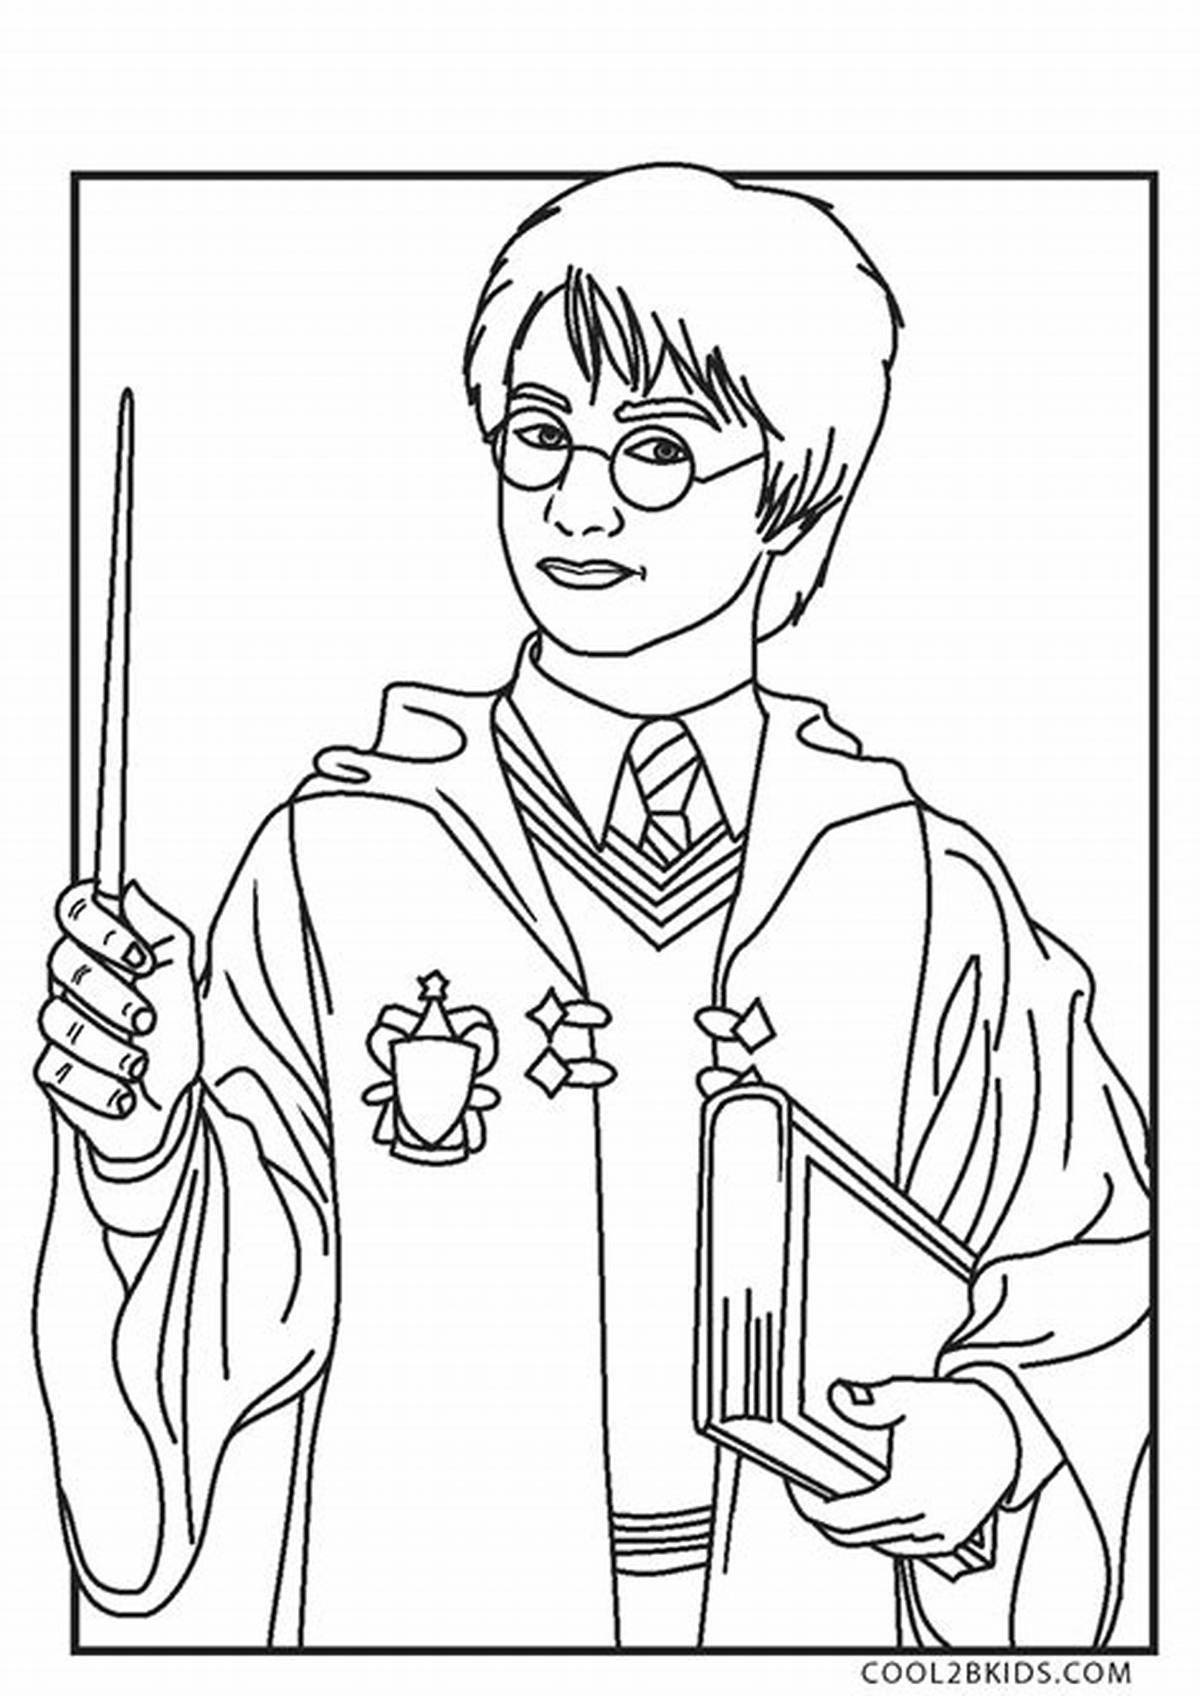 Harry potter glitter coloring book